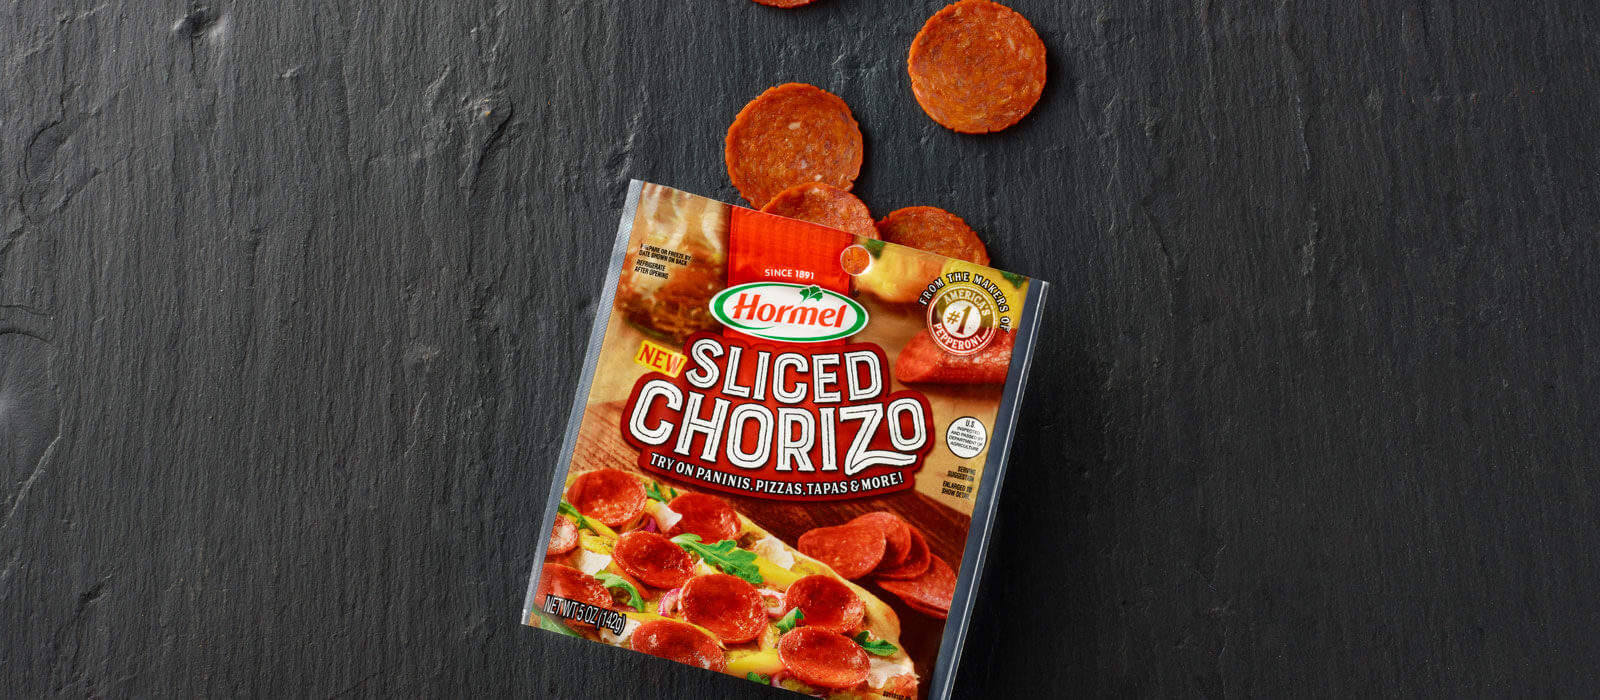 Sliced Chorizo package with slices on black background